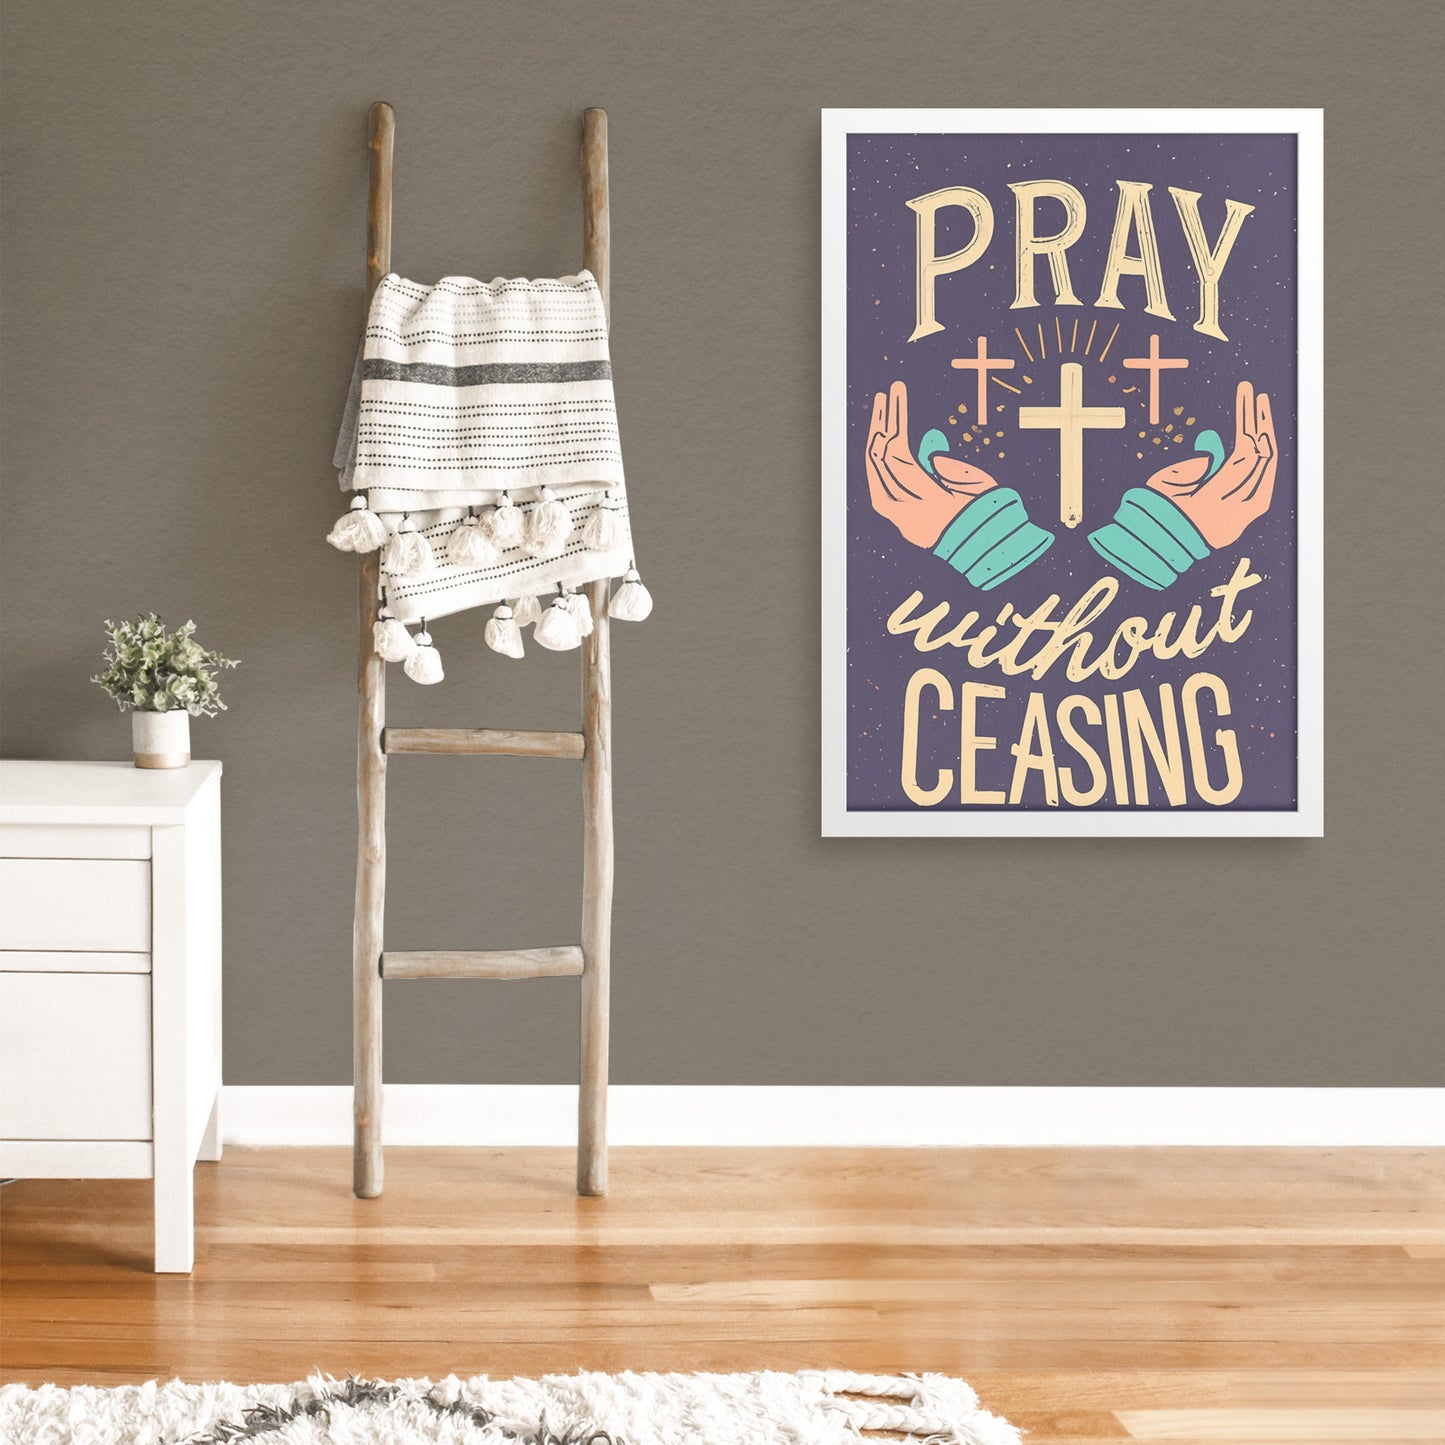 Pray Without Ceasing Retro Style Framed Print